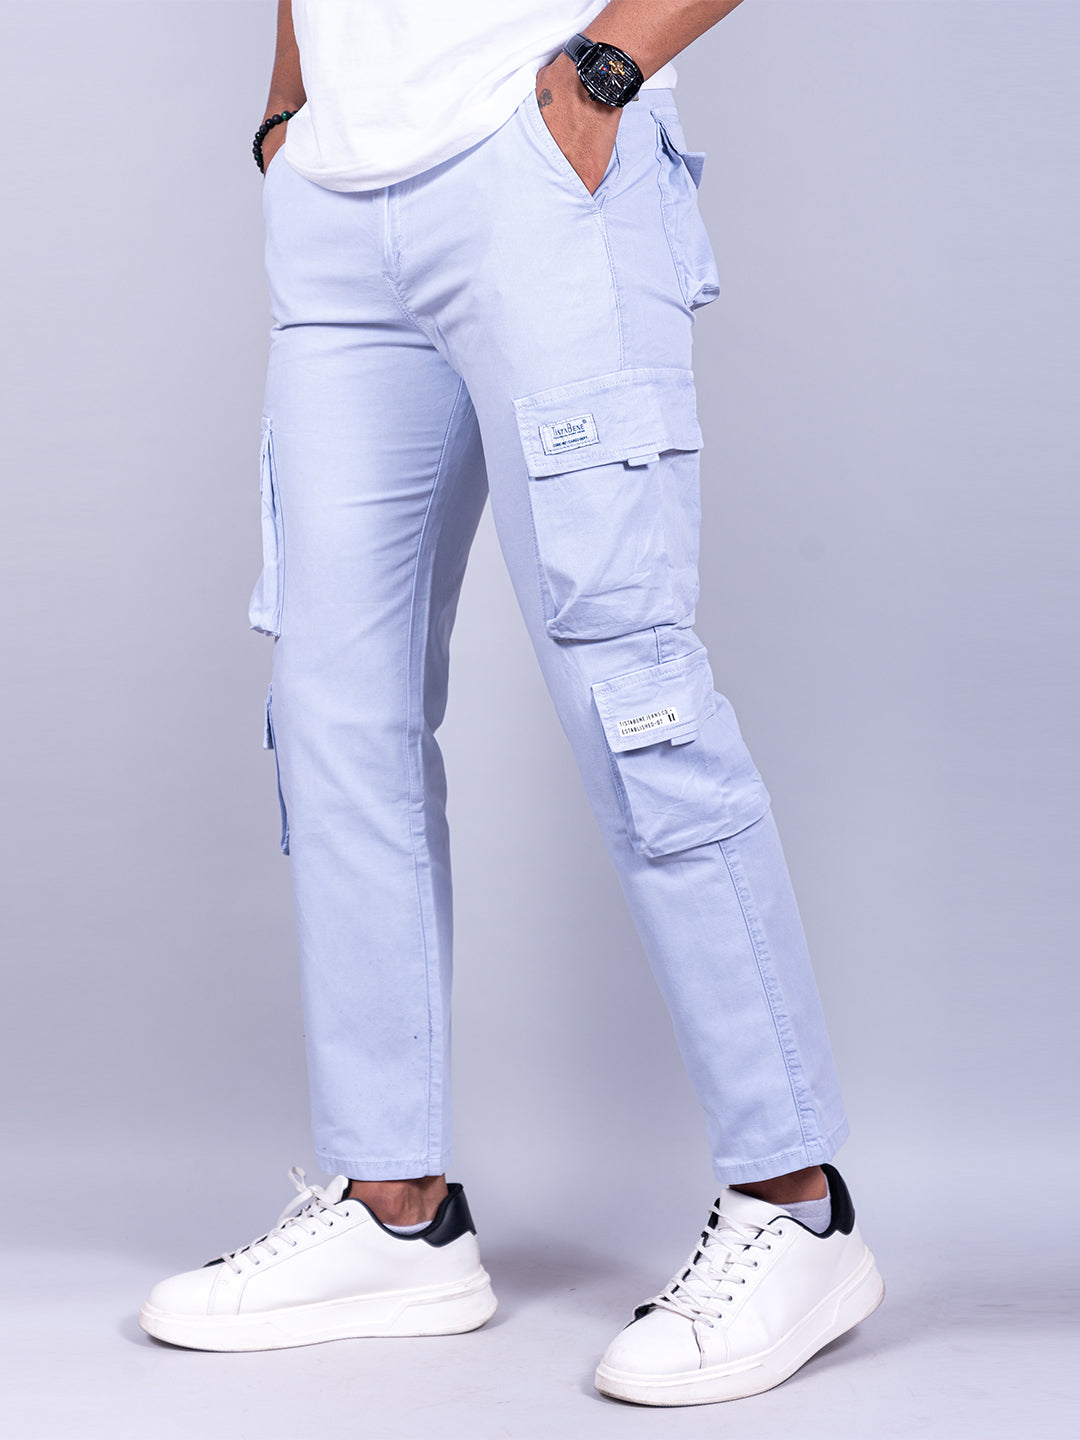 Buy Latest Trendy Cotton and Fabric Cargo Pants Online at Jimmy Luxury